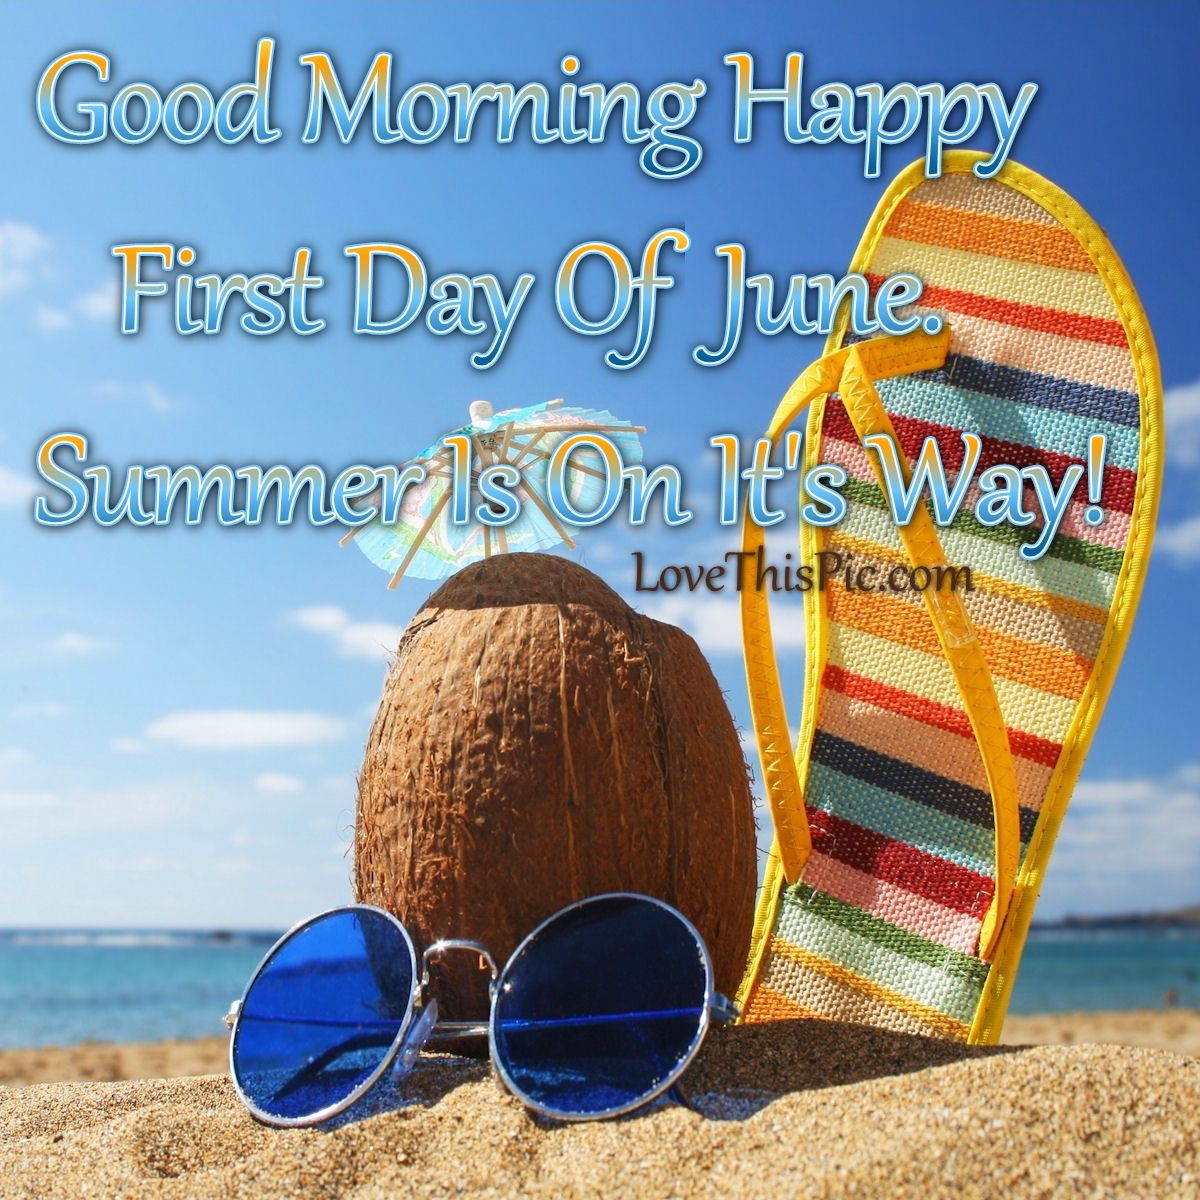 Good Morning Happy First Day Of June First Day Of June